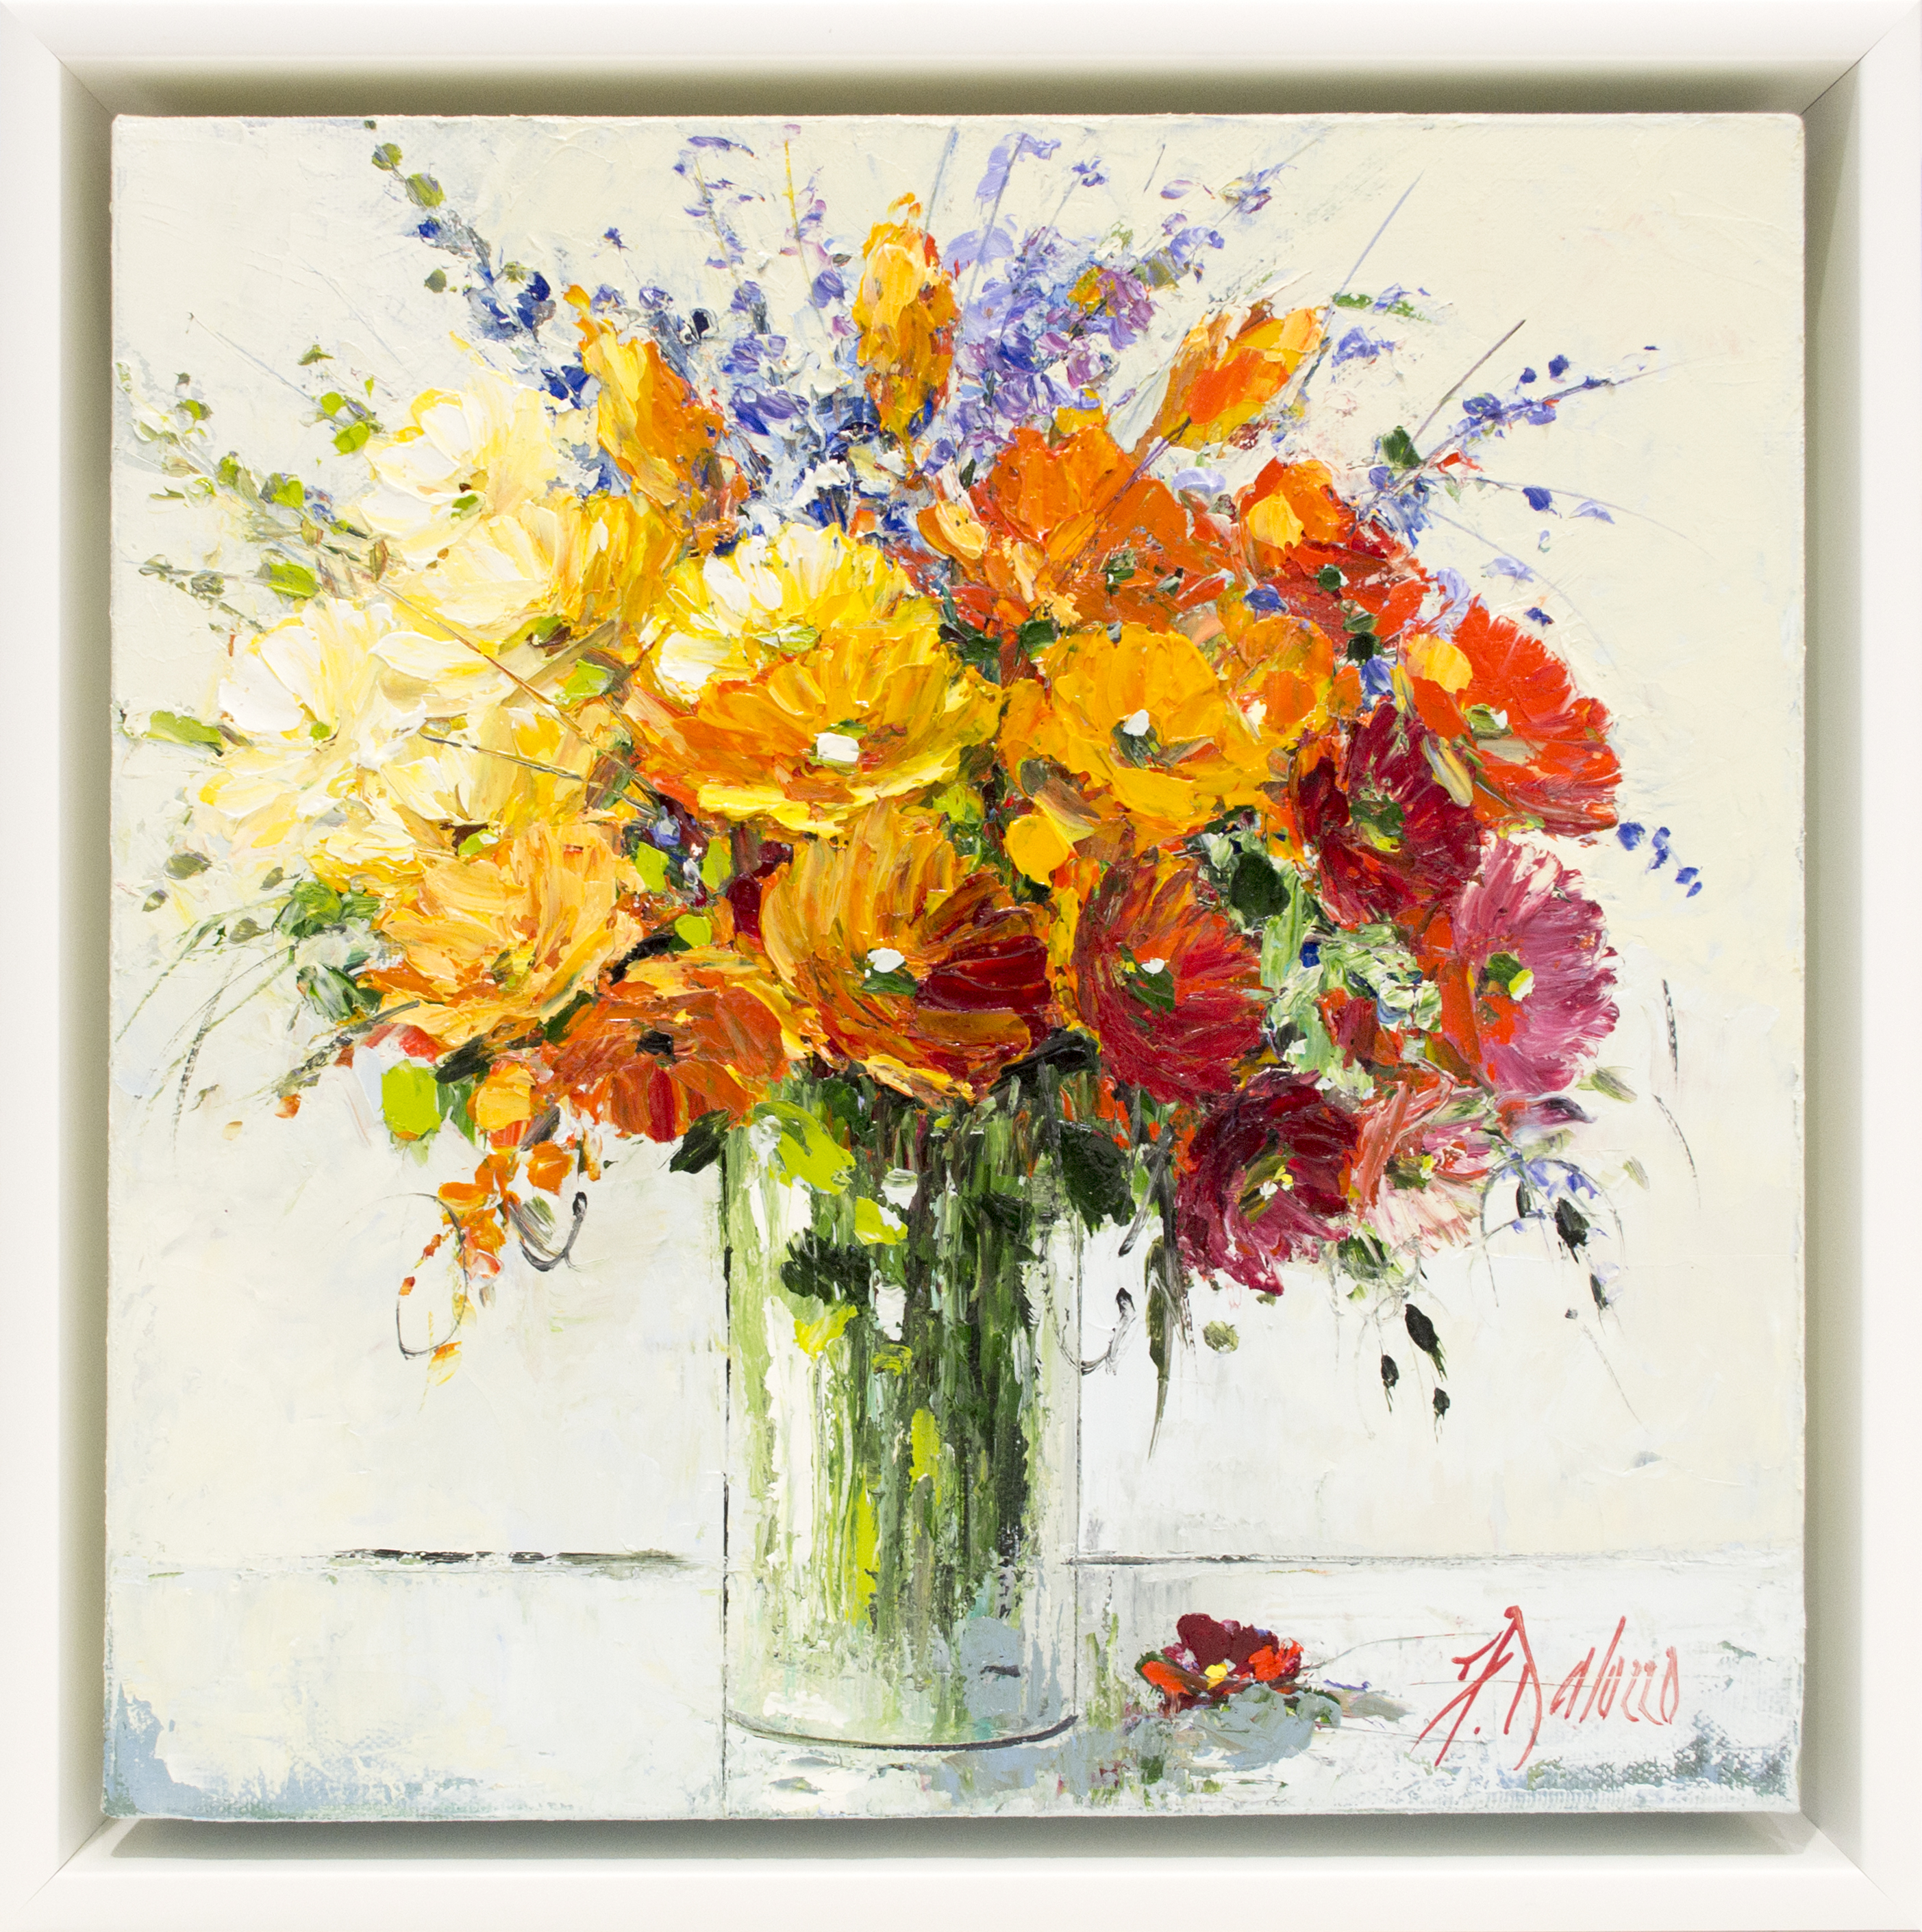 Framed Front View Of Still Life Painting "Sunburnt Bouquet" By Judith Dalozzo